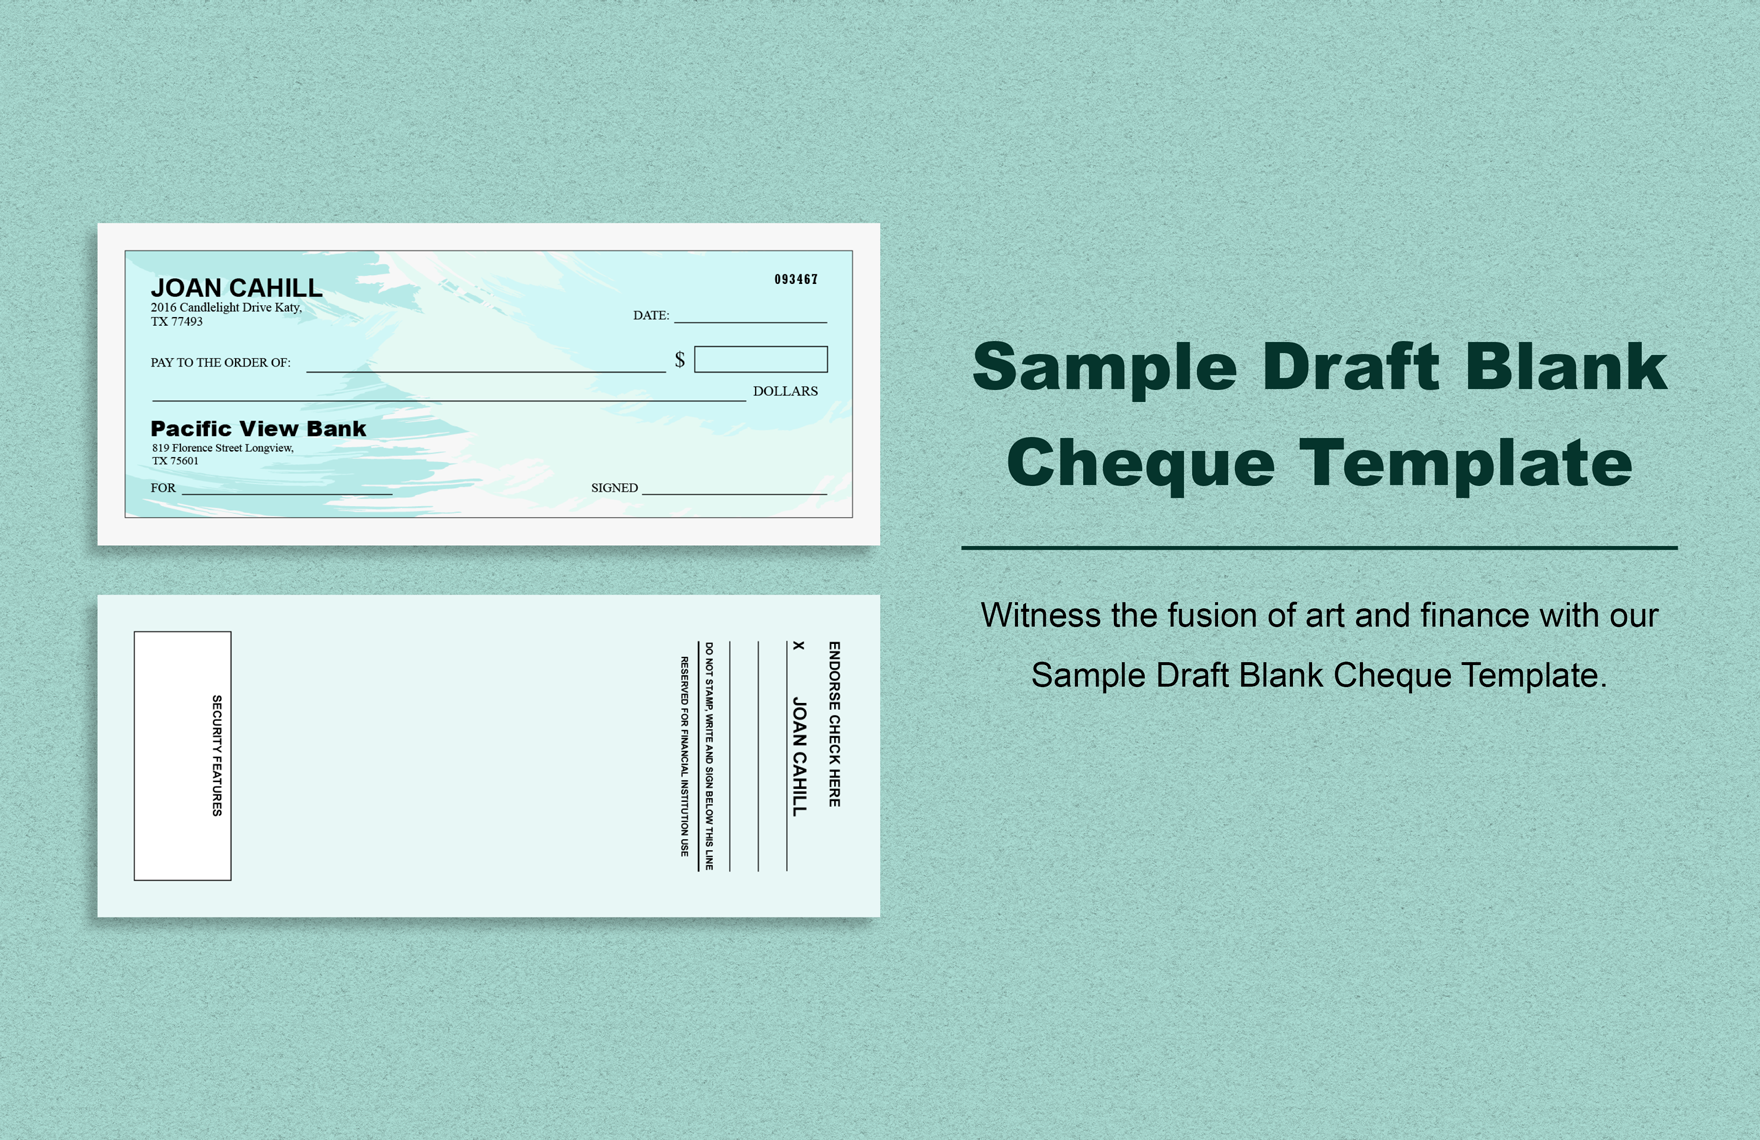 Sample Draft Blank Cheque Template in Word, Illustrator, PSD